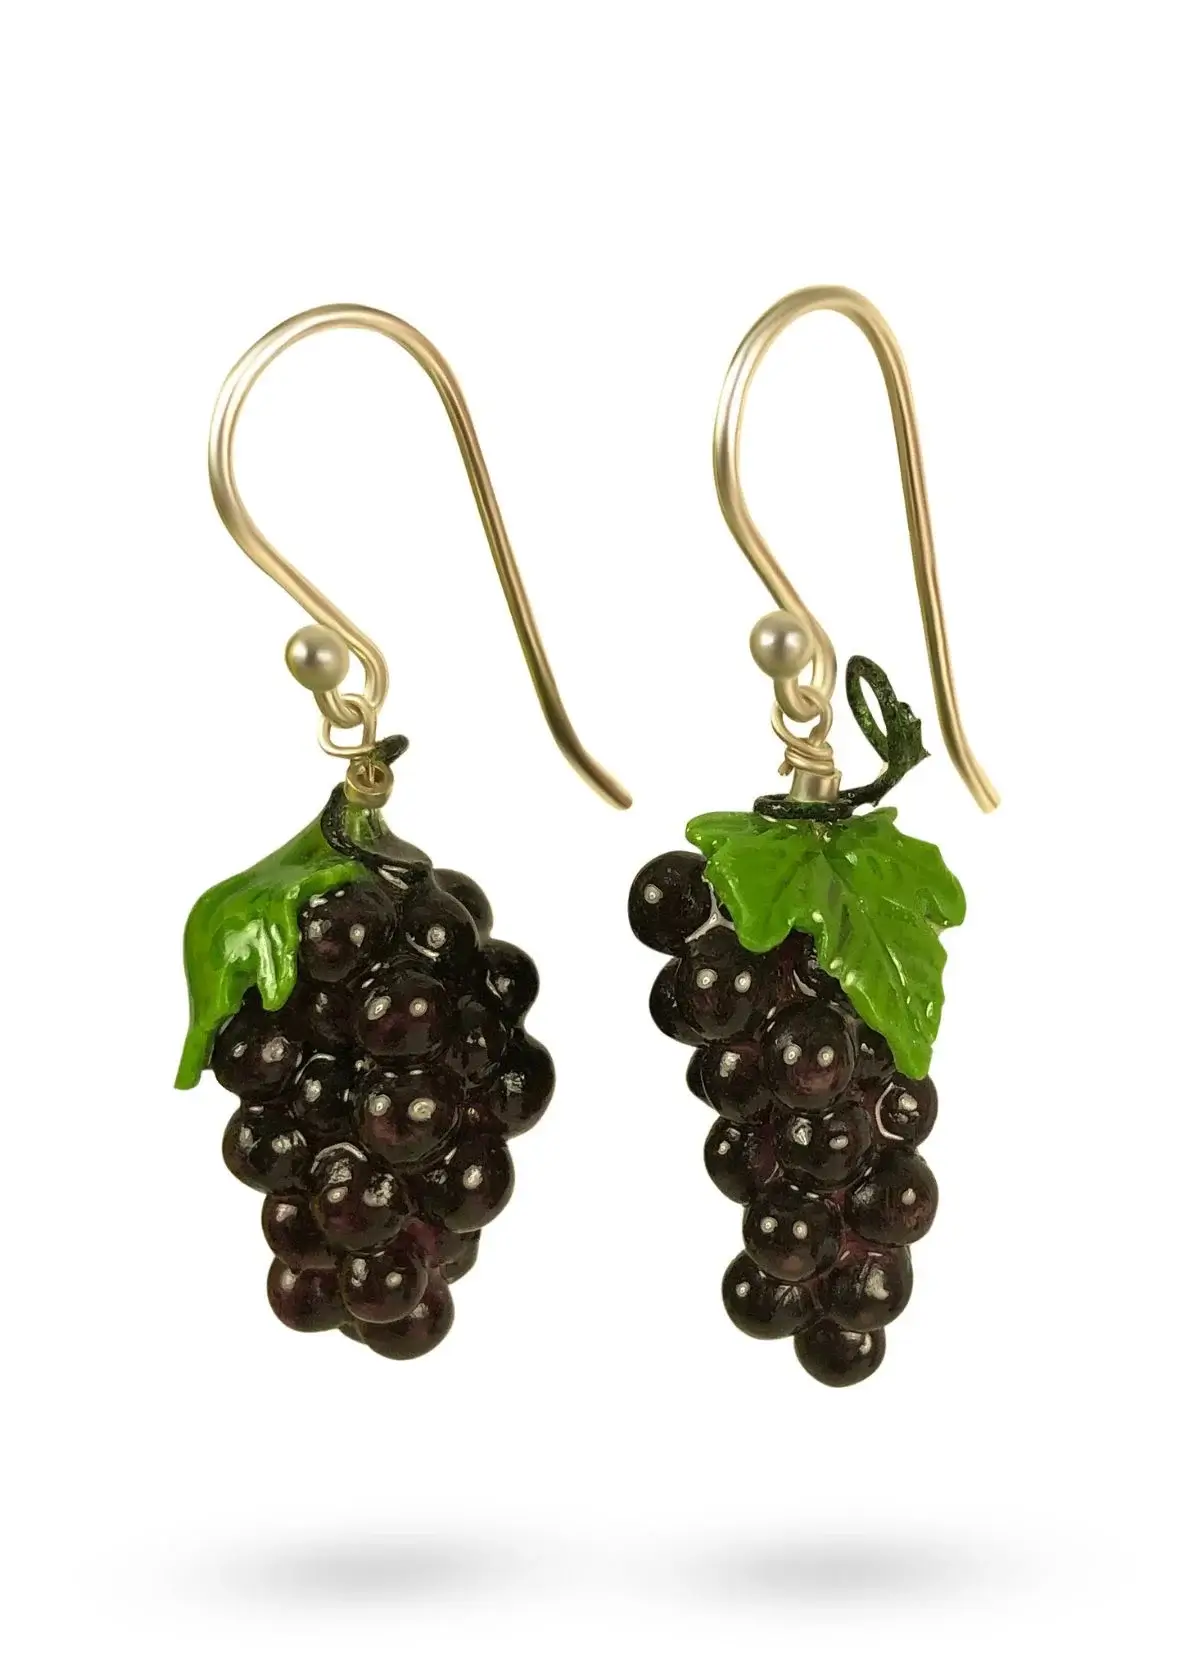 How to choose the right grape earrings? 